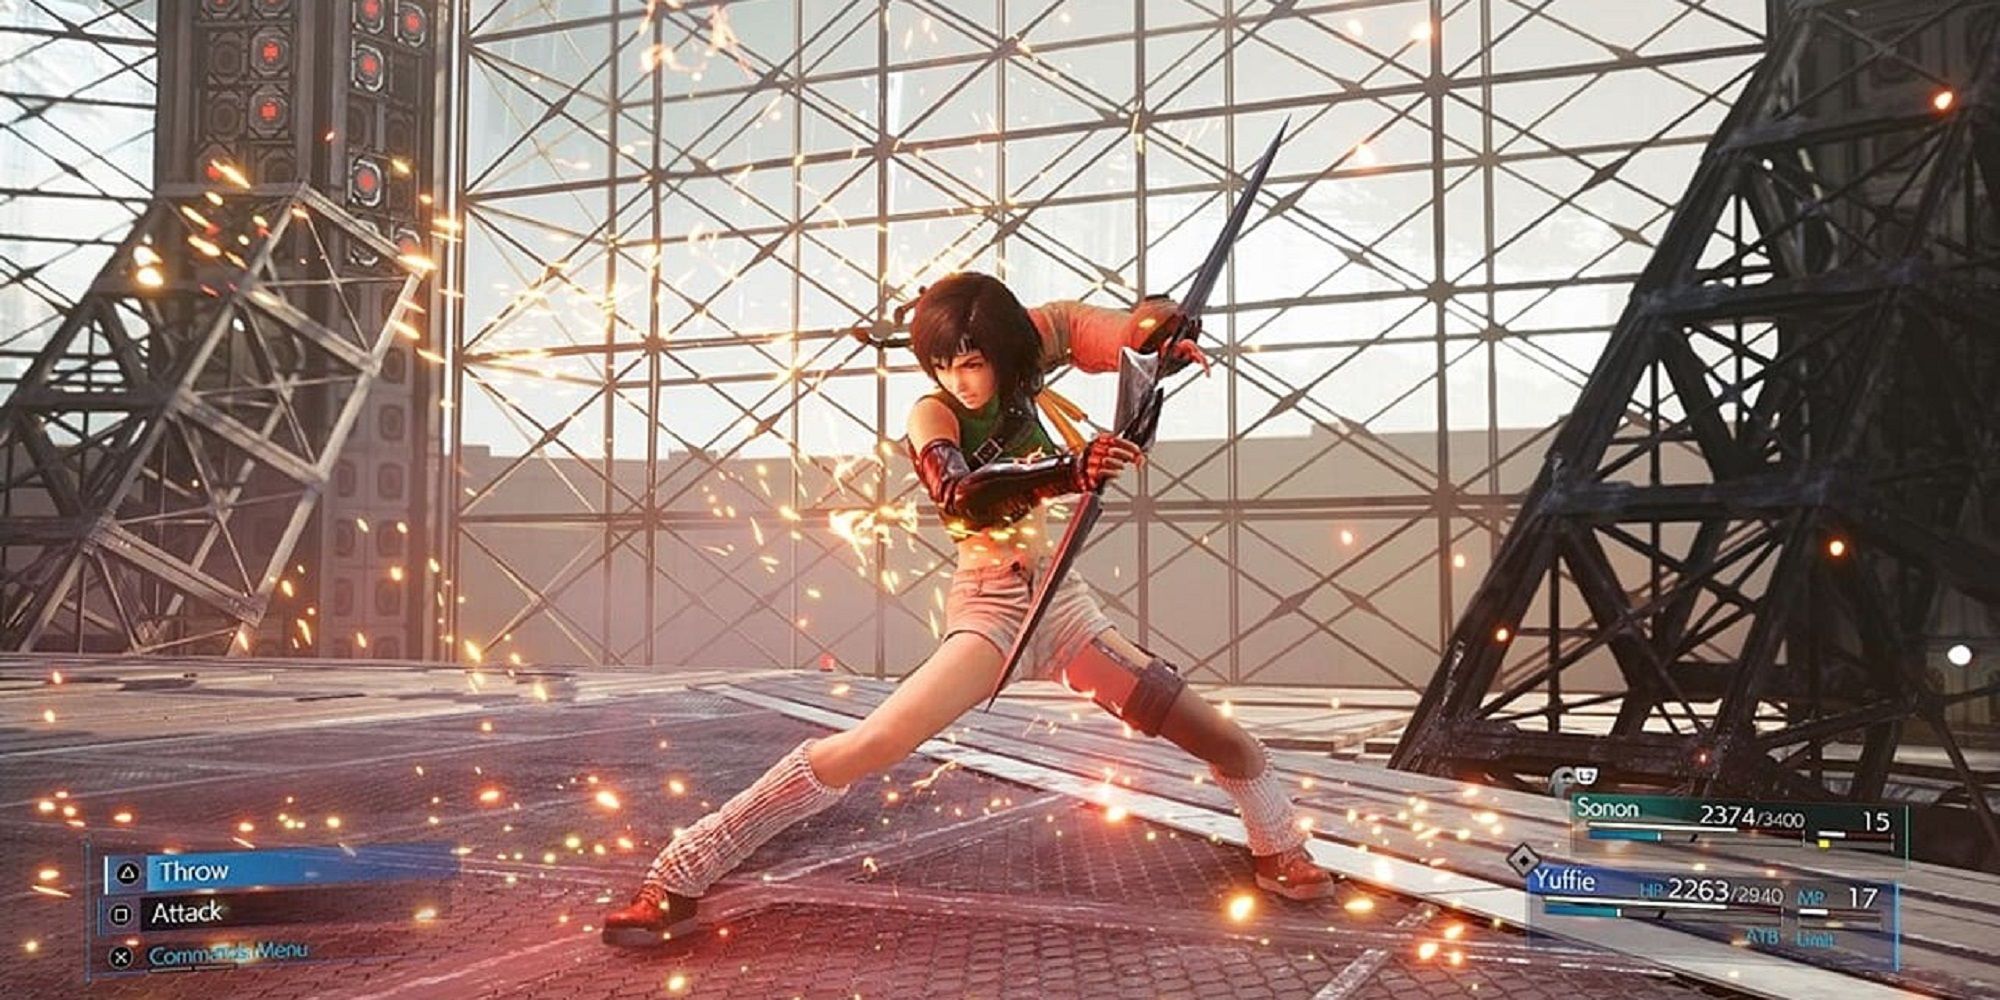 Yuffie pictured during combat in FF7 Intergrade. She is holding her 4-point Shuriken.